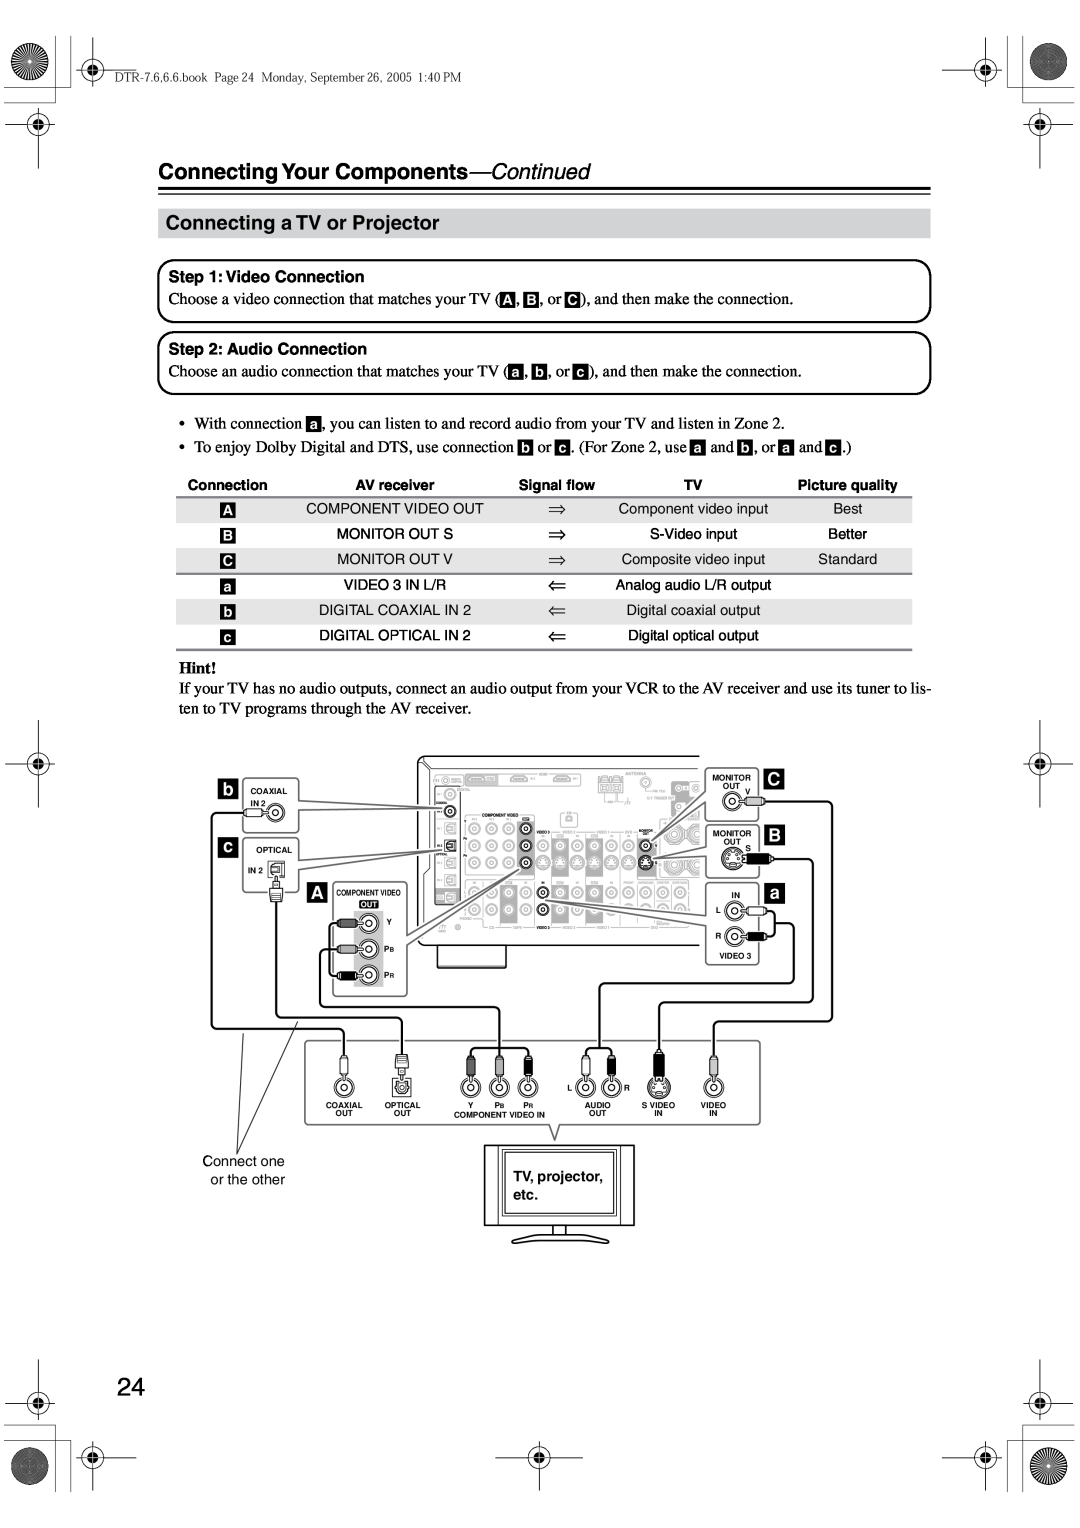 Integra DTR-7.6/6.6 instruction manual Connecting a TV or Projector, Hint, Connecting Your Components—Continued 